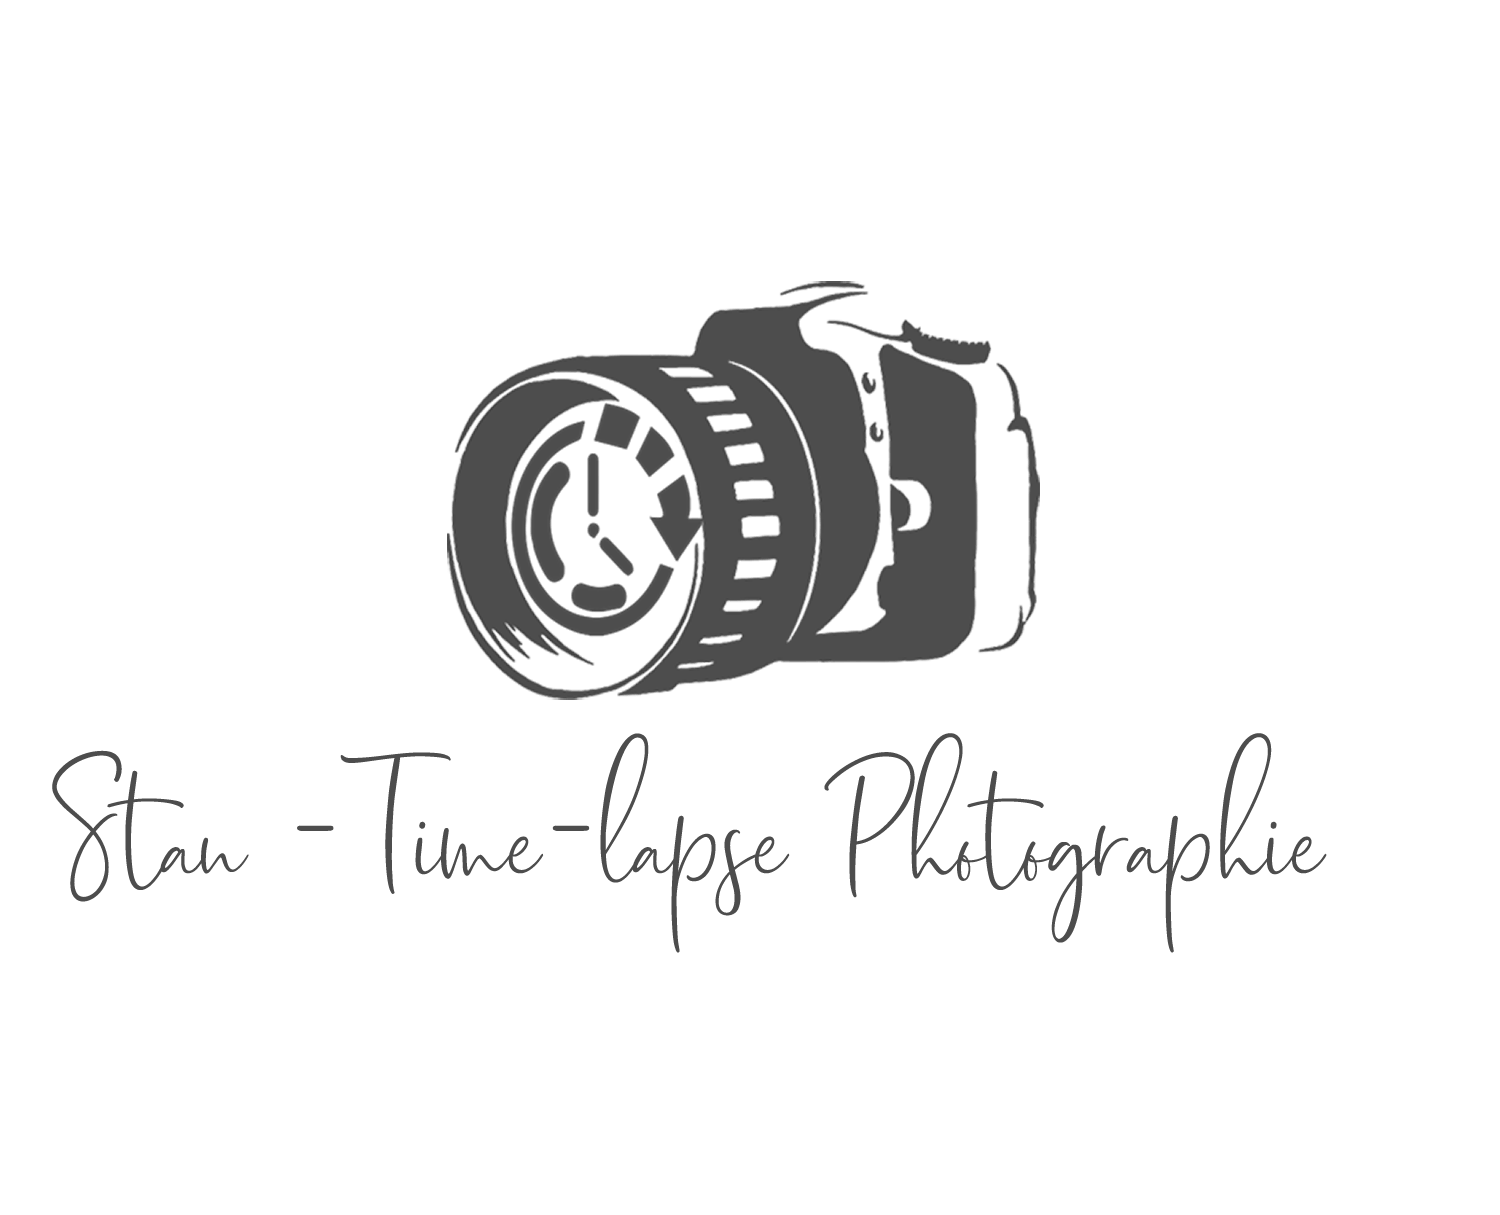 Stan - Time-lapse & Photographie